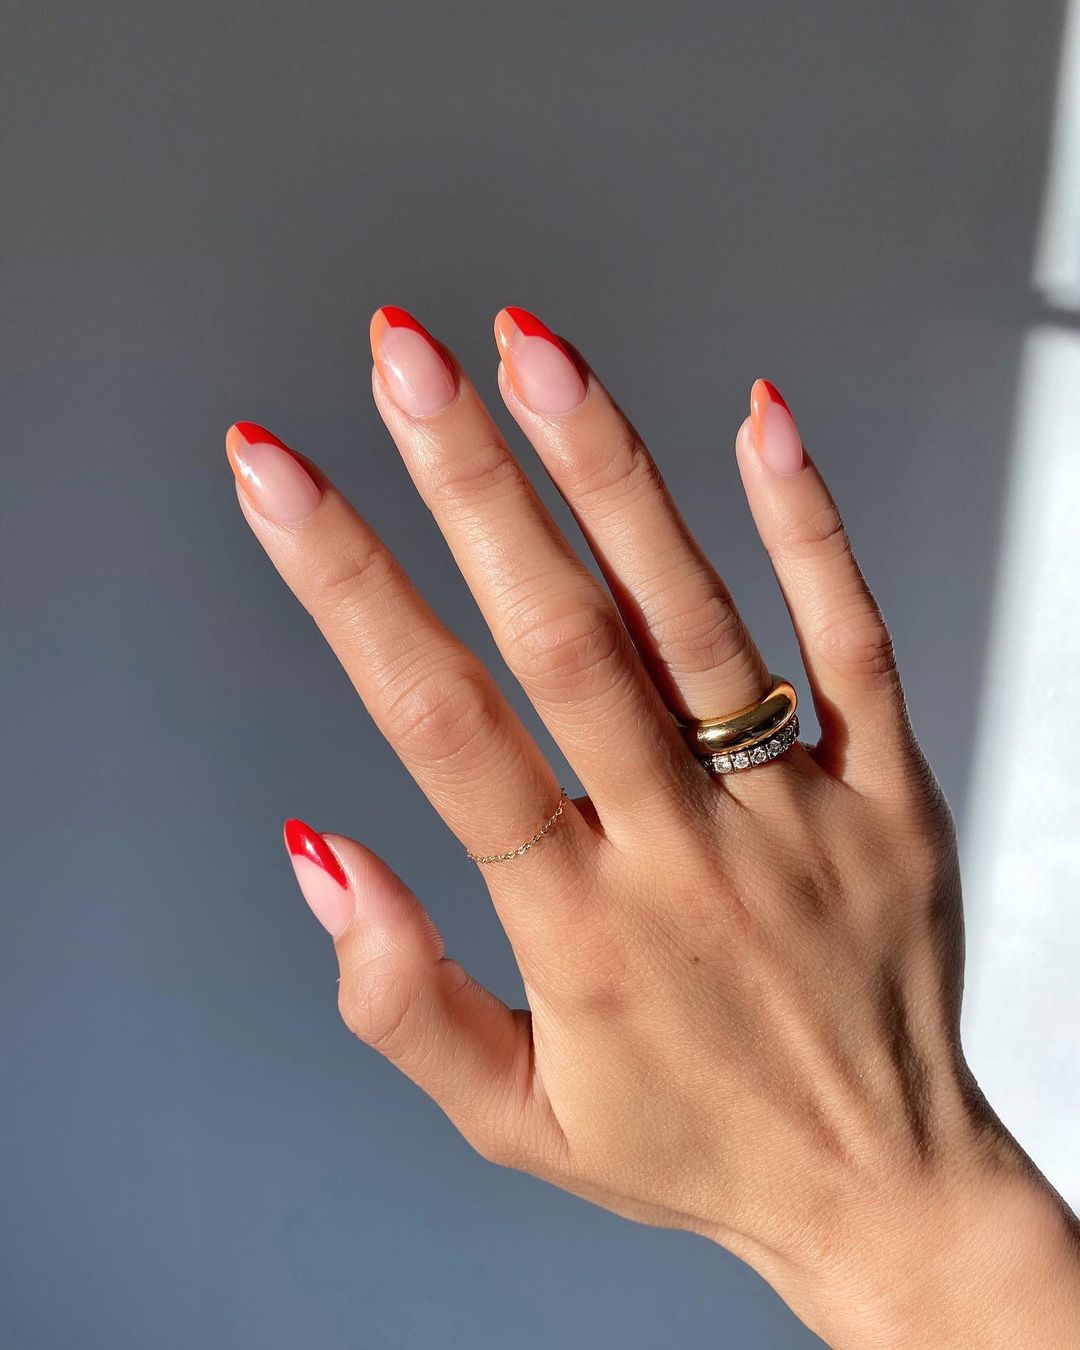 Colourful French manicures: Split Tips